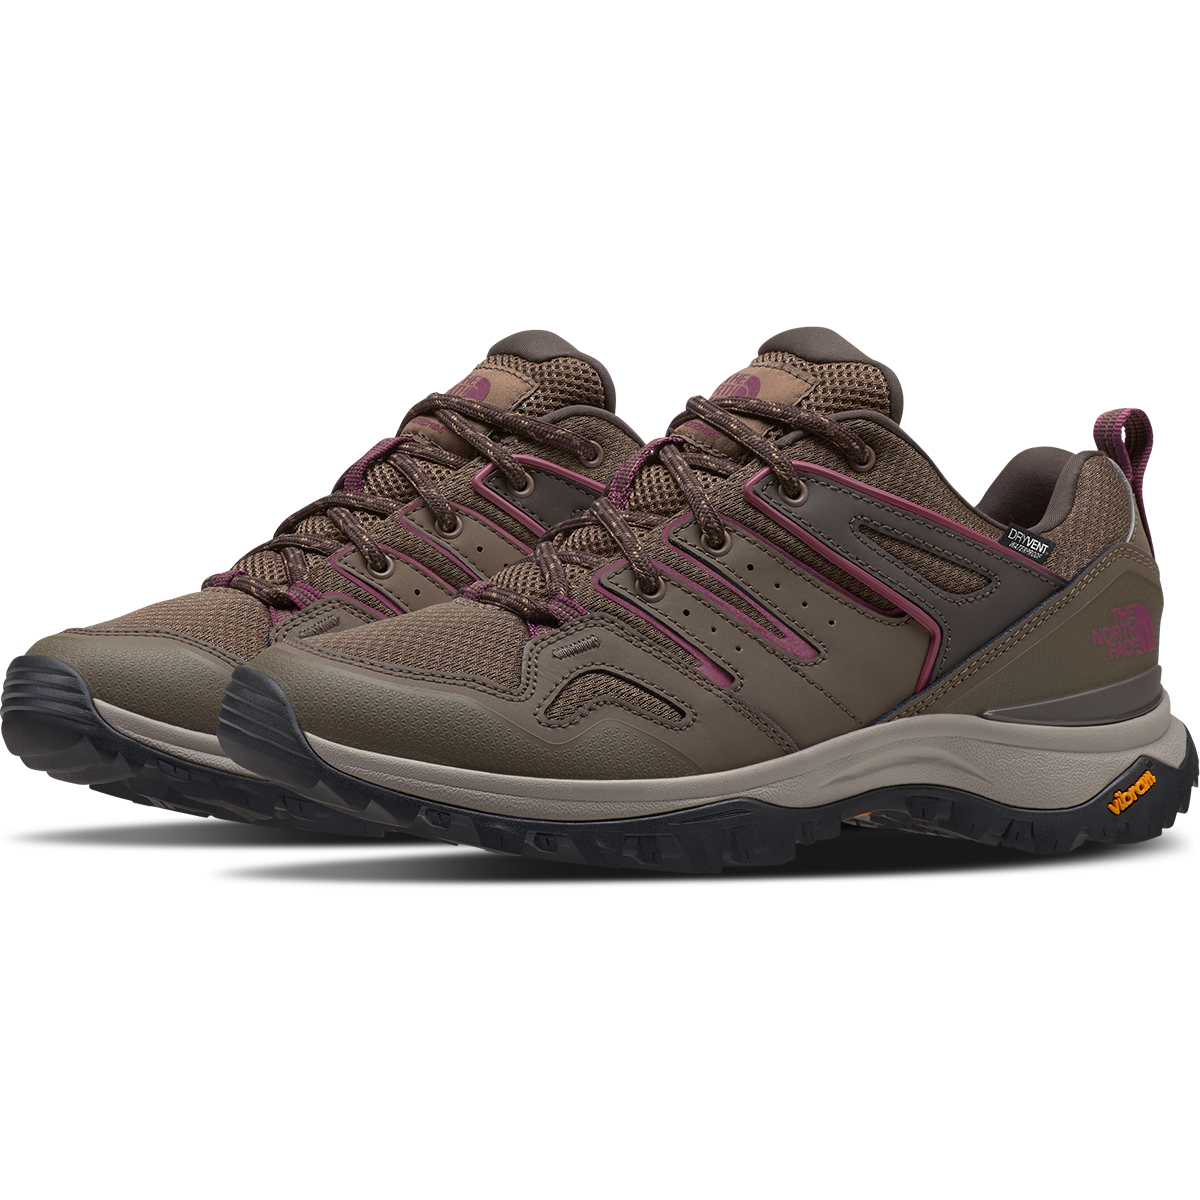 The North Face Women's Hedgehog Fastpack Ii Wp Hiking Shoes